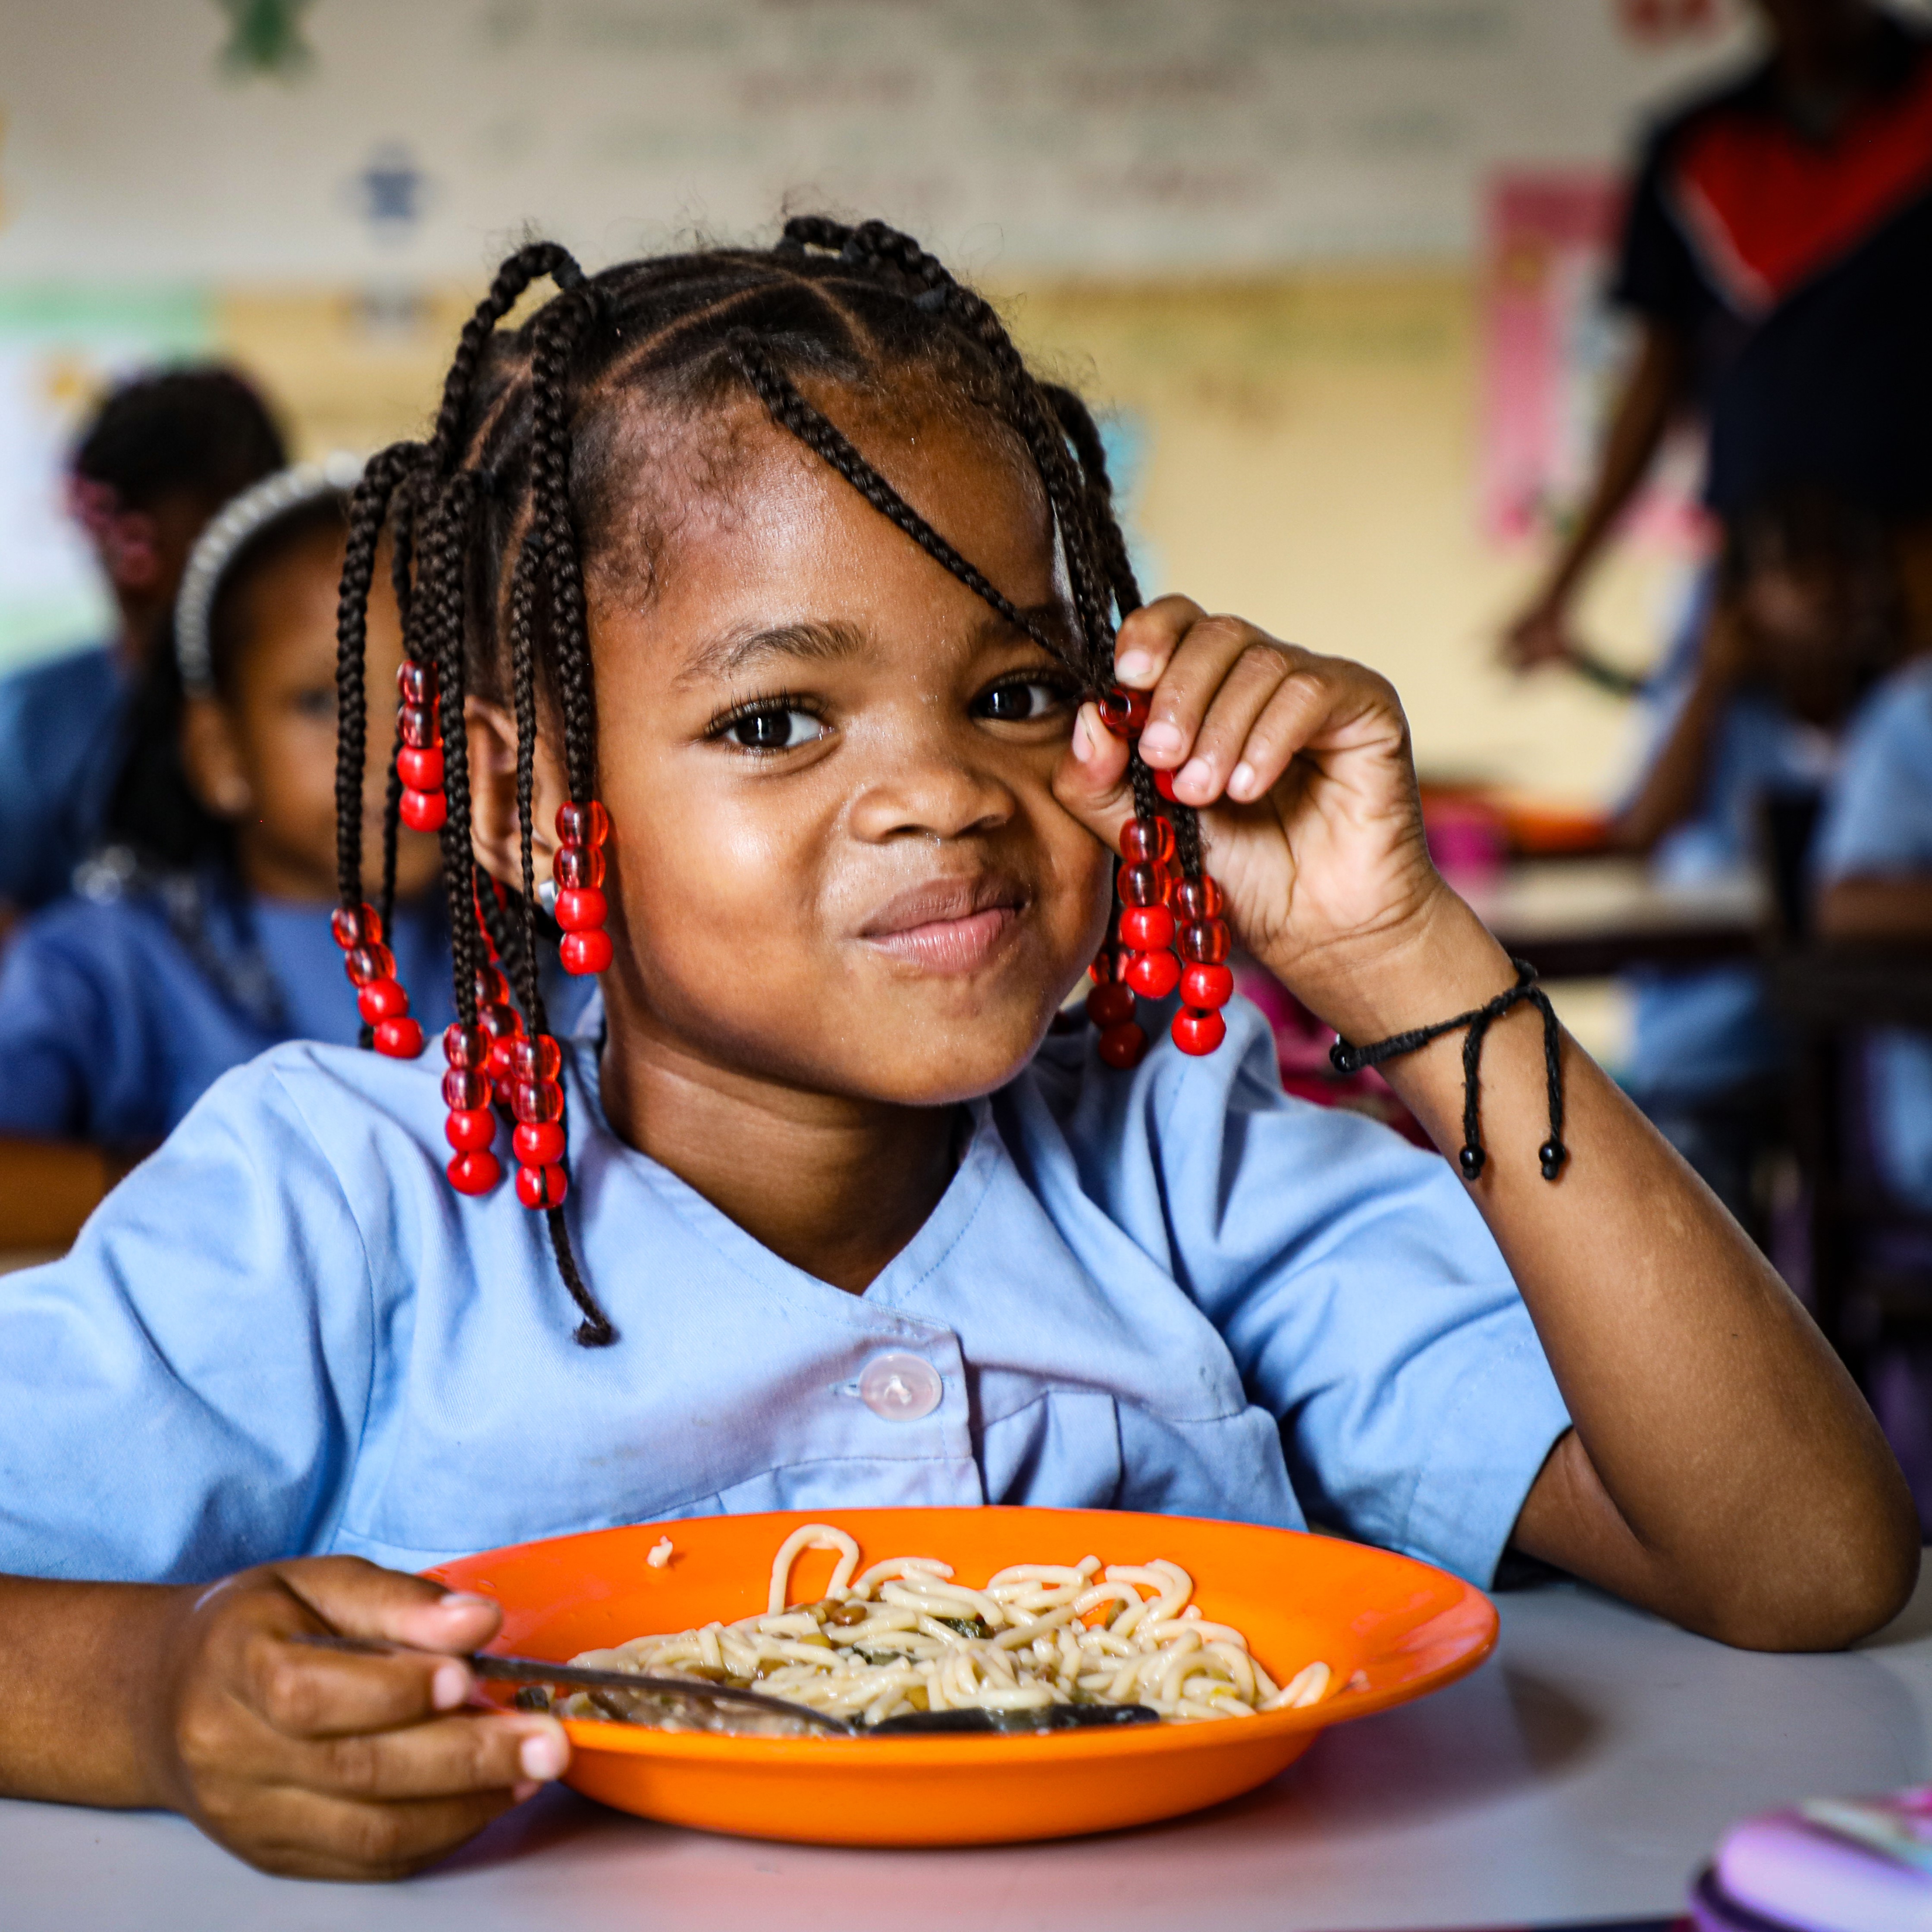 A learner from Eugenio Tavares Primary School in Praia enjoys a hot meal provided by the National School Feeding Programme in Cape Verde.